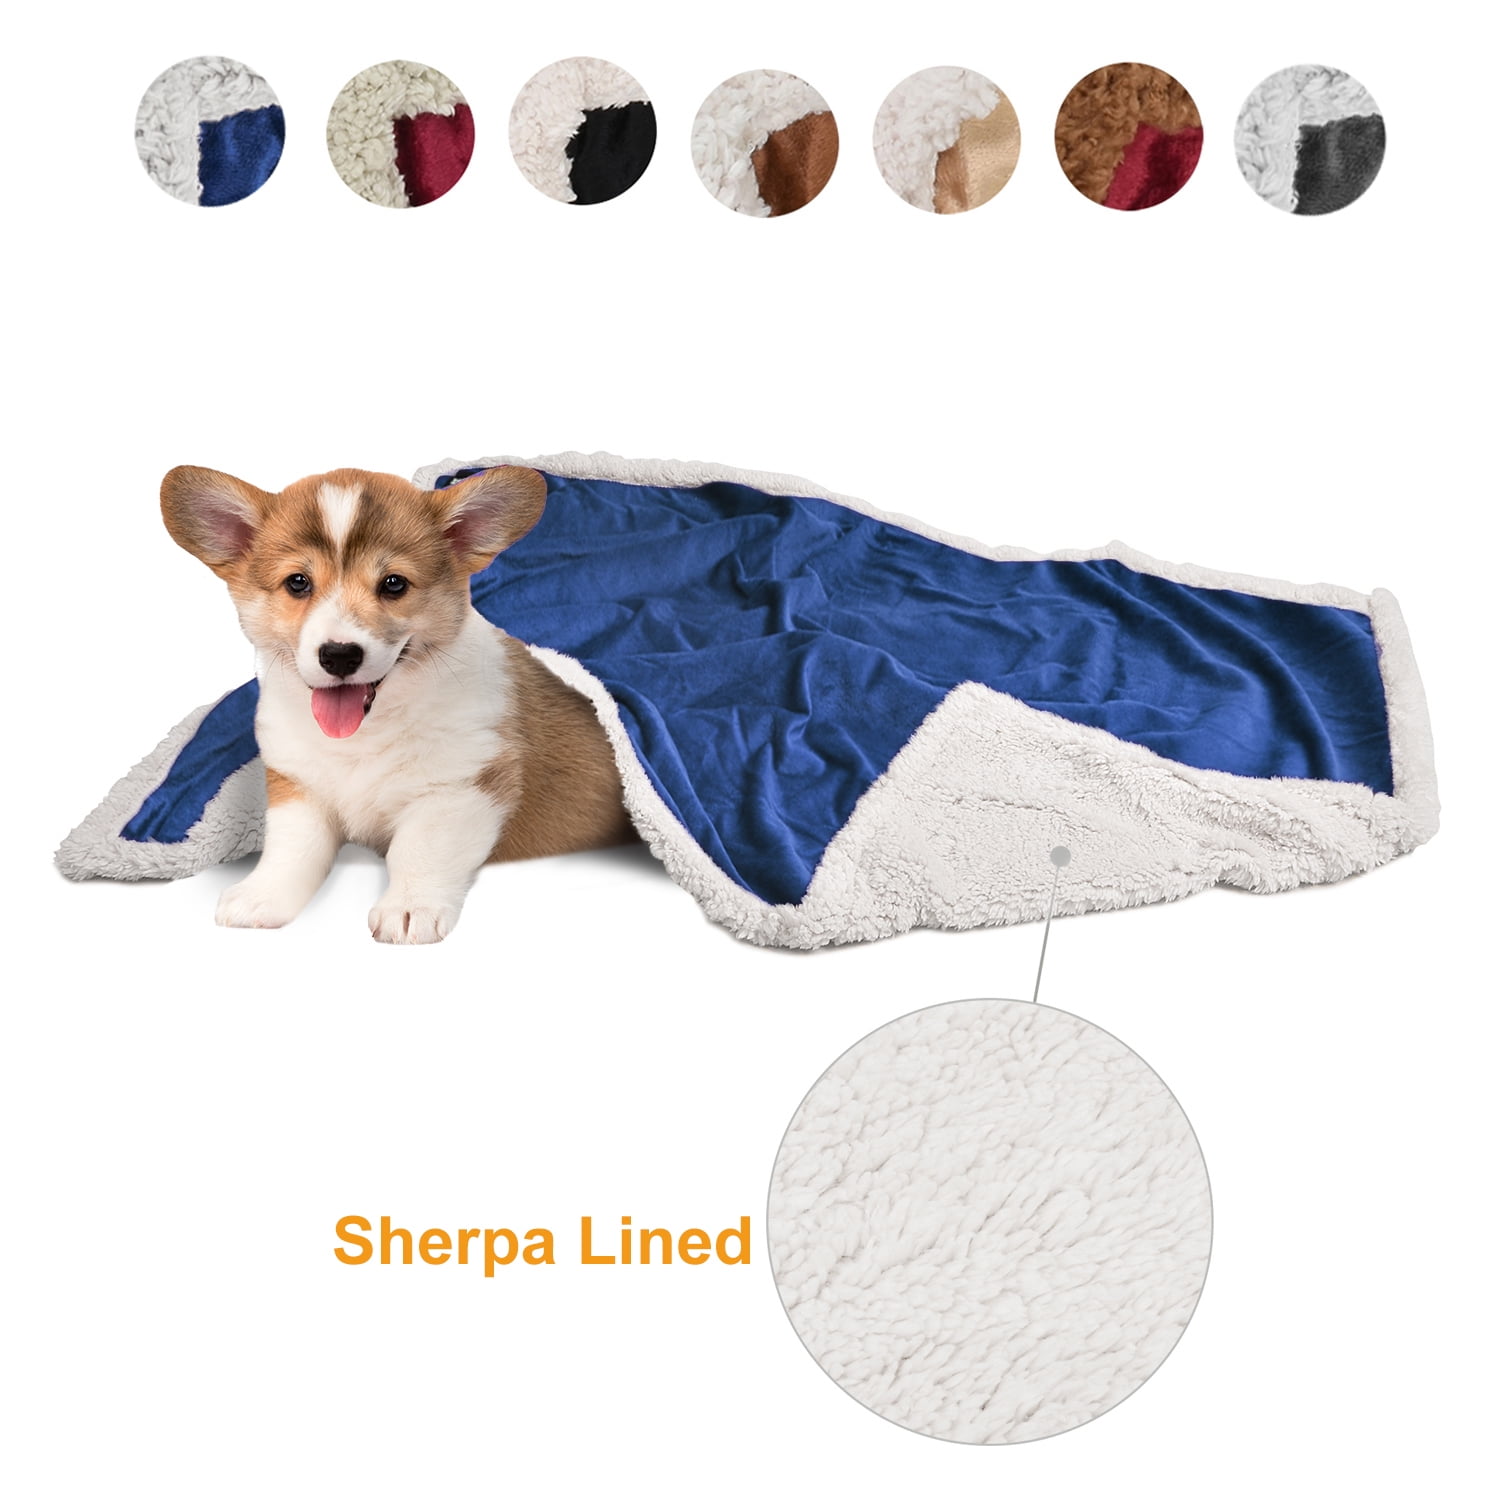 QIMO Pet Bed for Cats and Dogs Warm Calming Cuddler Cuddler Kennel Soft Puppy Sofa Cat Cushion Bed Sleeping Bed Dogs Nest Bed Portable Washable 